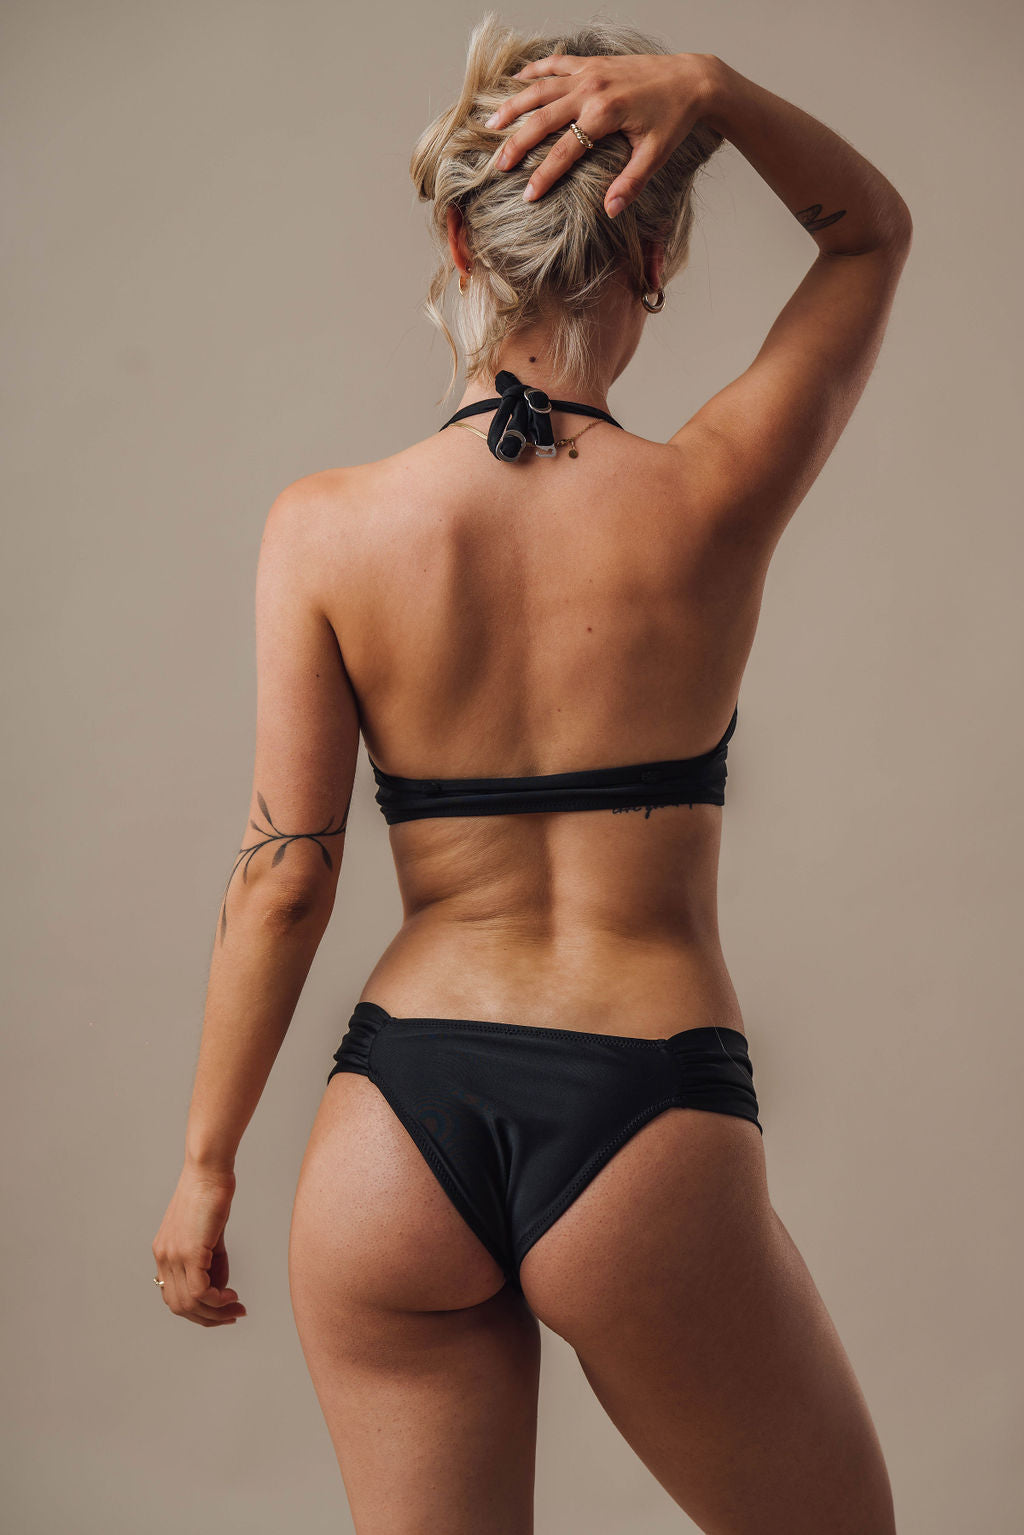 Swybrand bottom part of the swimsuit in black color and simple design 